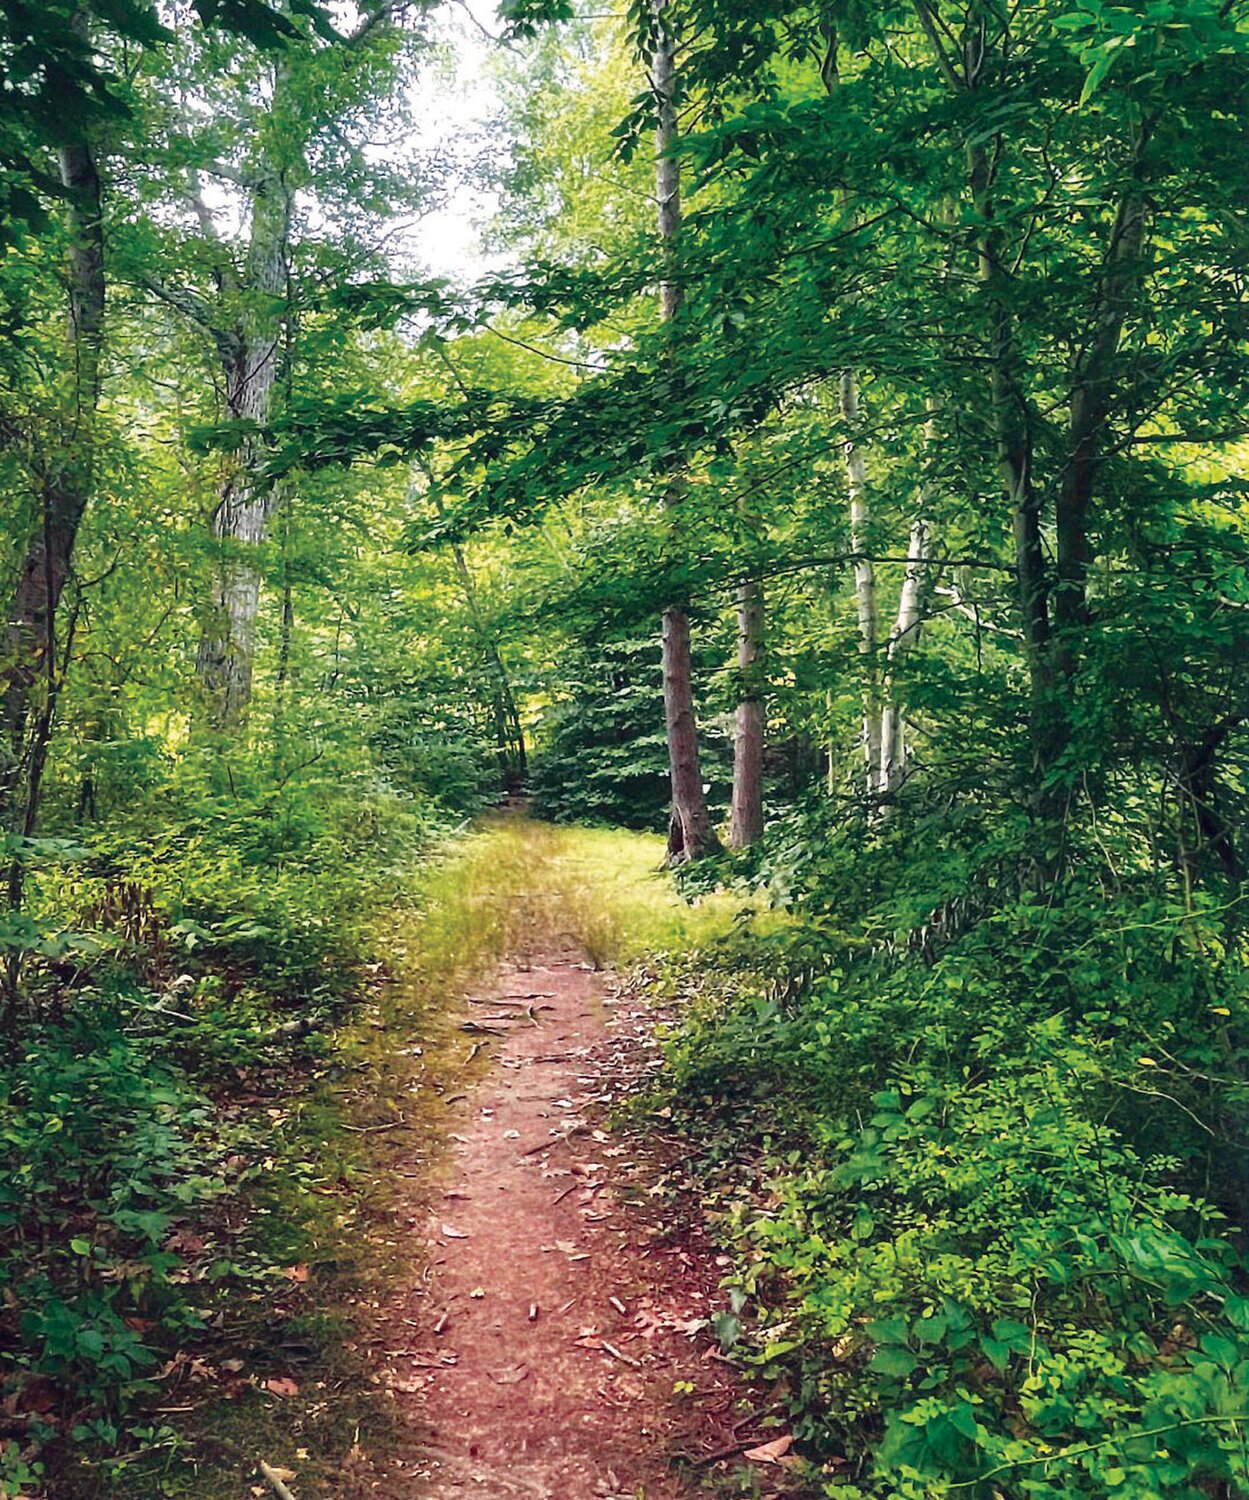 The cover of the 2022 “Inventory of Natural Resources“ shows a path through woods in the Honey Hollow Watershed.